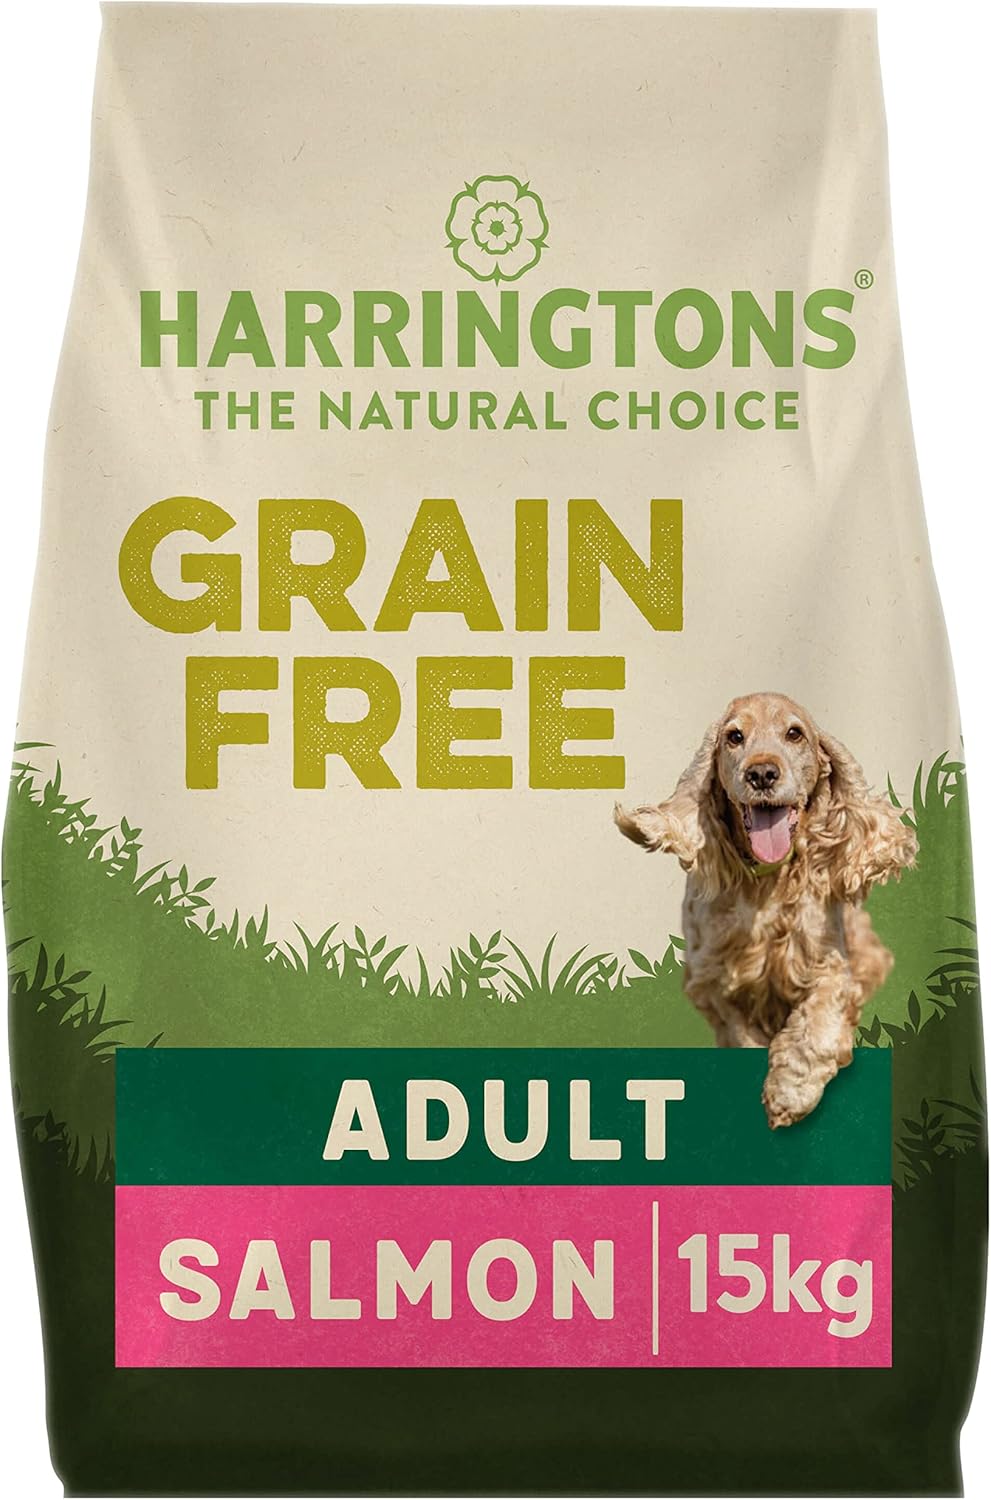 Harringtons Complete Grain Free Hypoallergenic Salmon & Sweet Potato Dry Adult Dog Food 15kg - Made with All Natural Ingredients?GFHYPSP-15